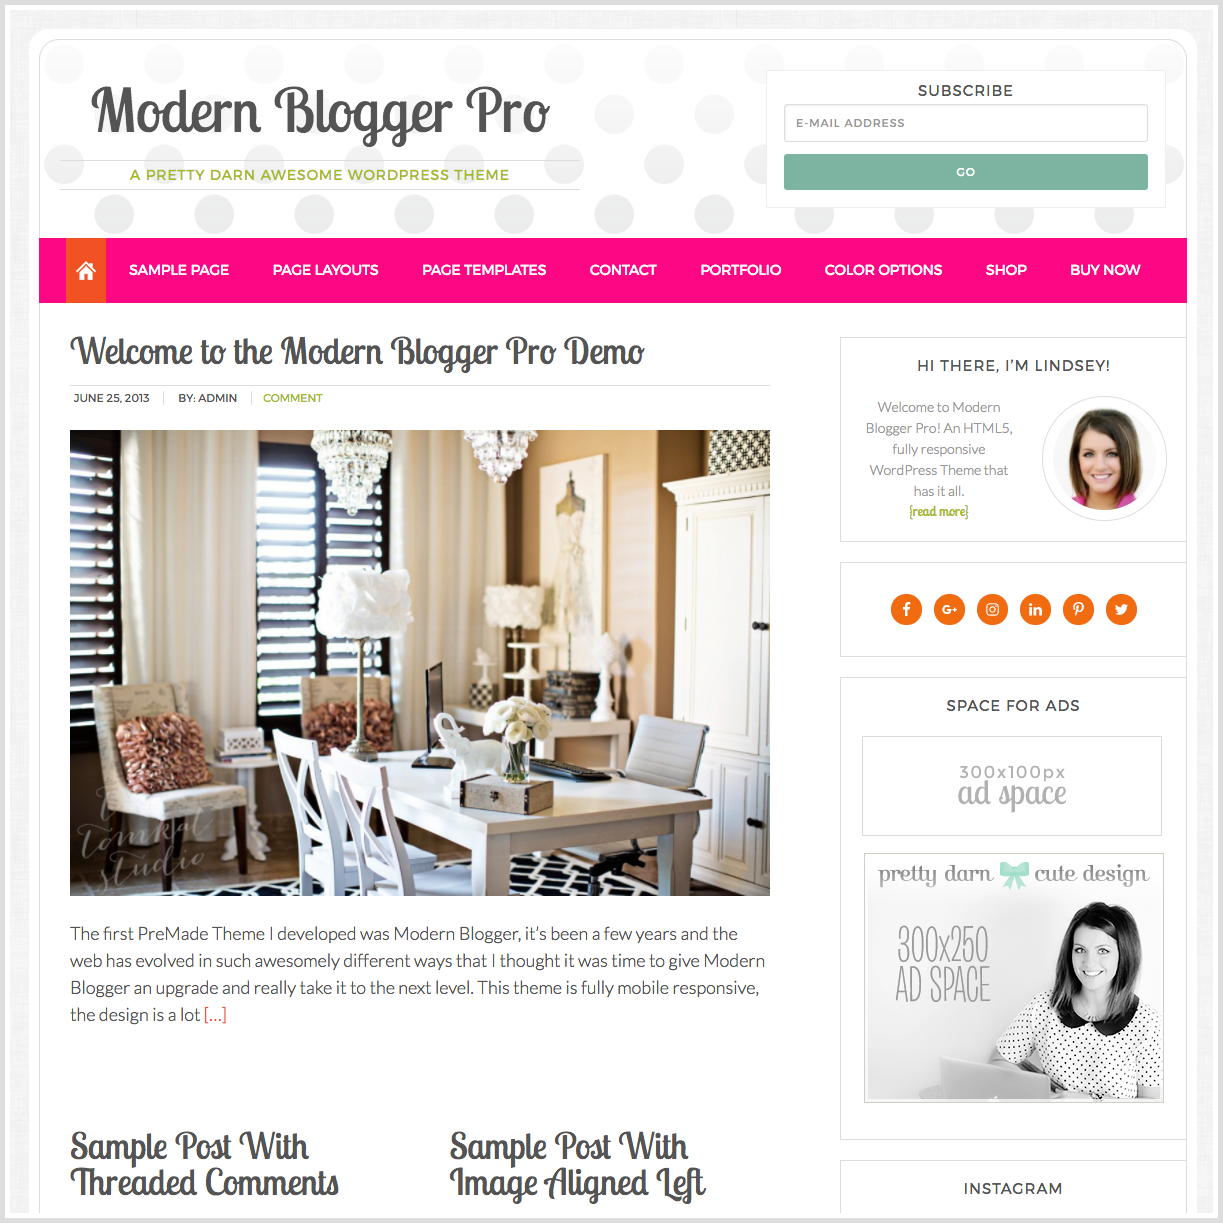 How to Change Fonts on the Modern Blogger Pro Theme